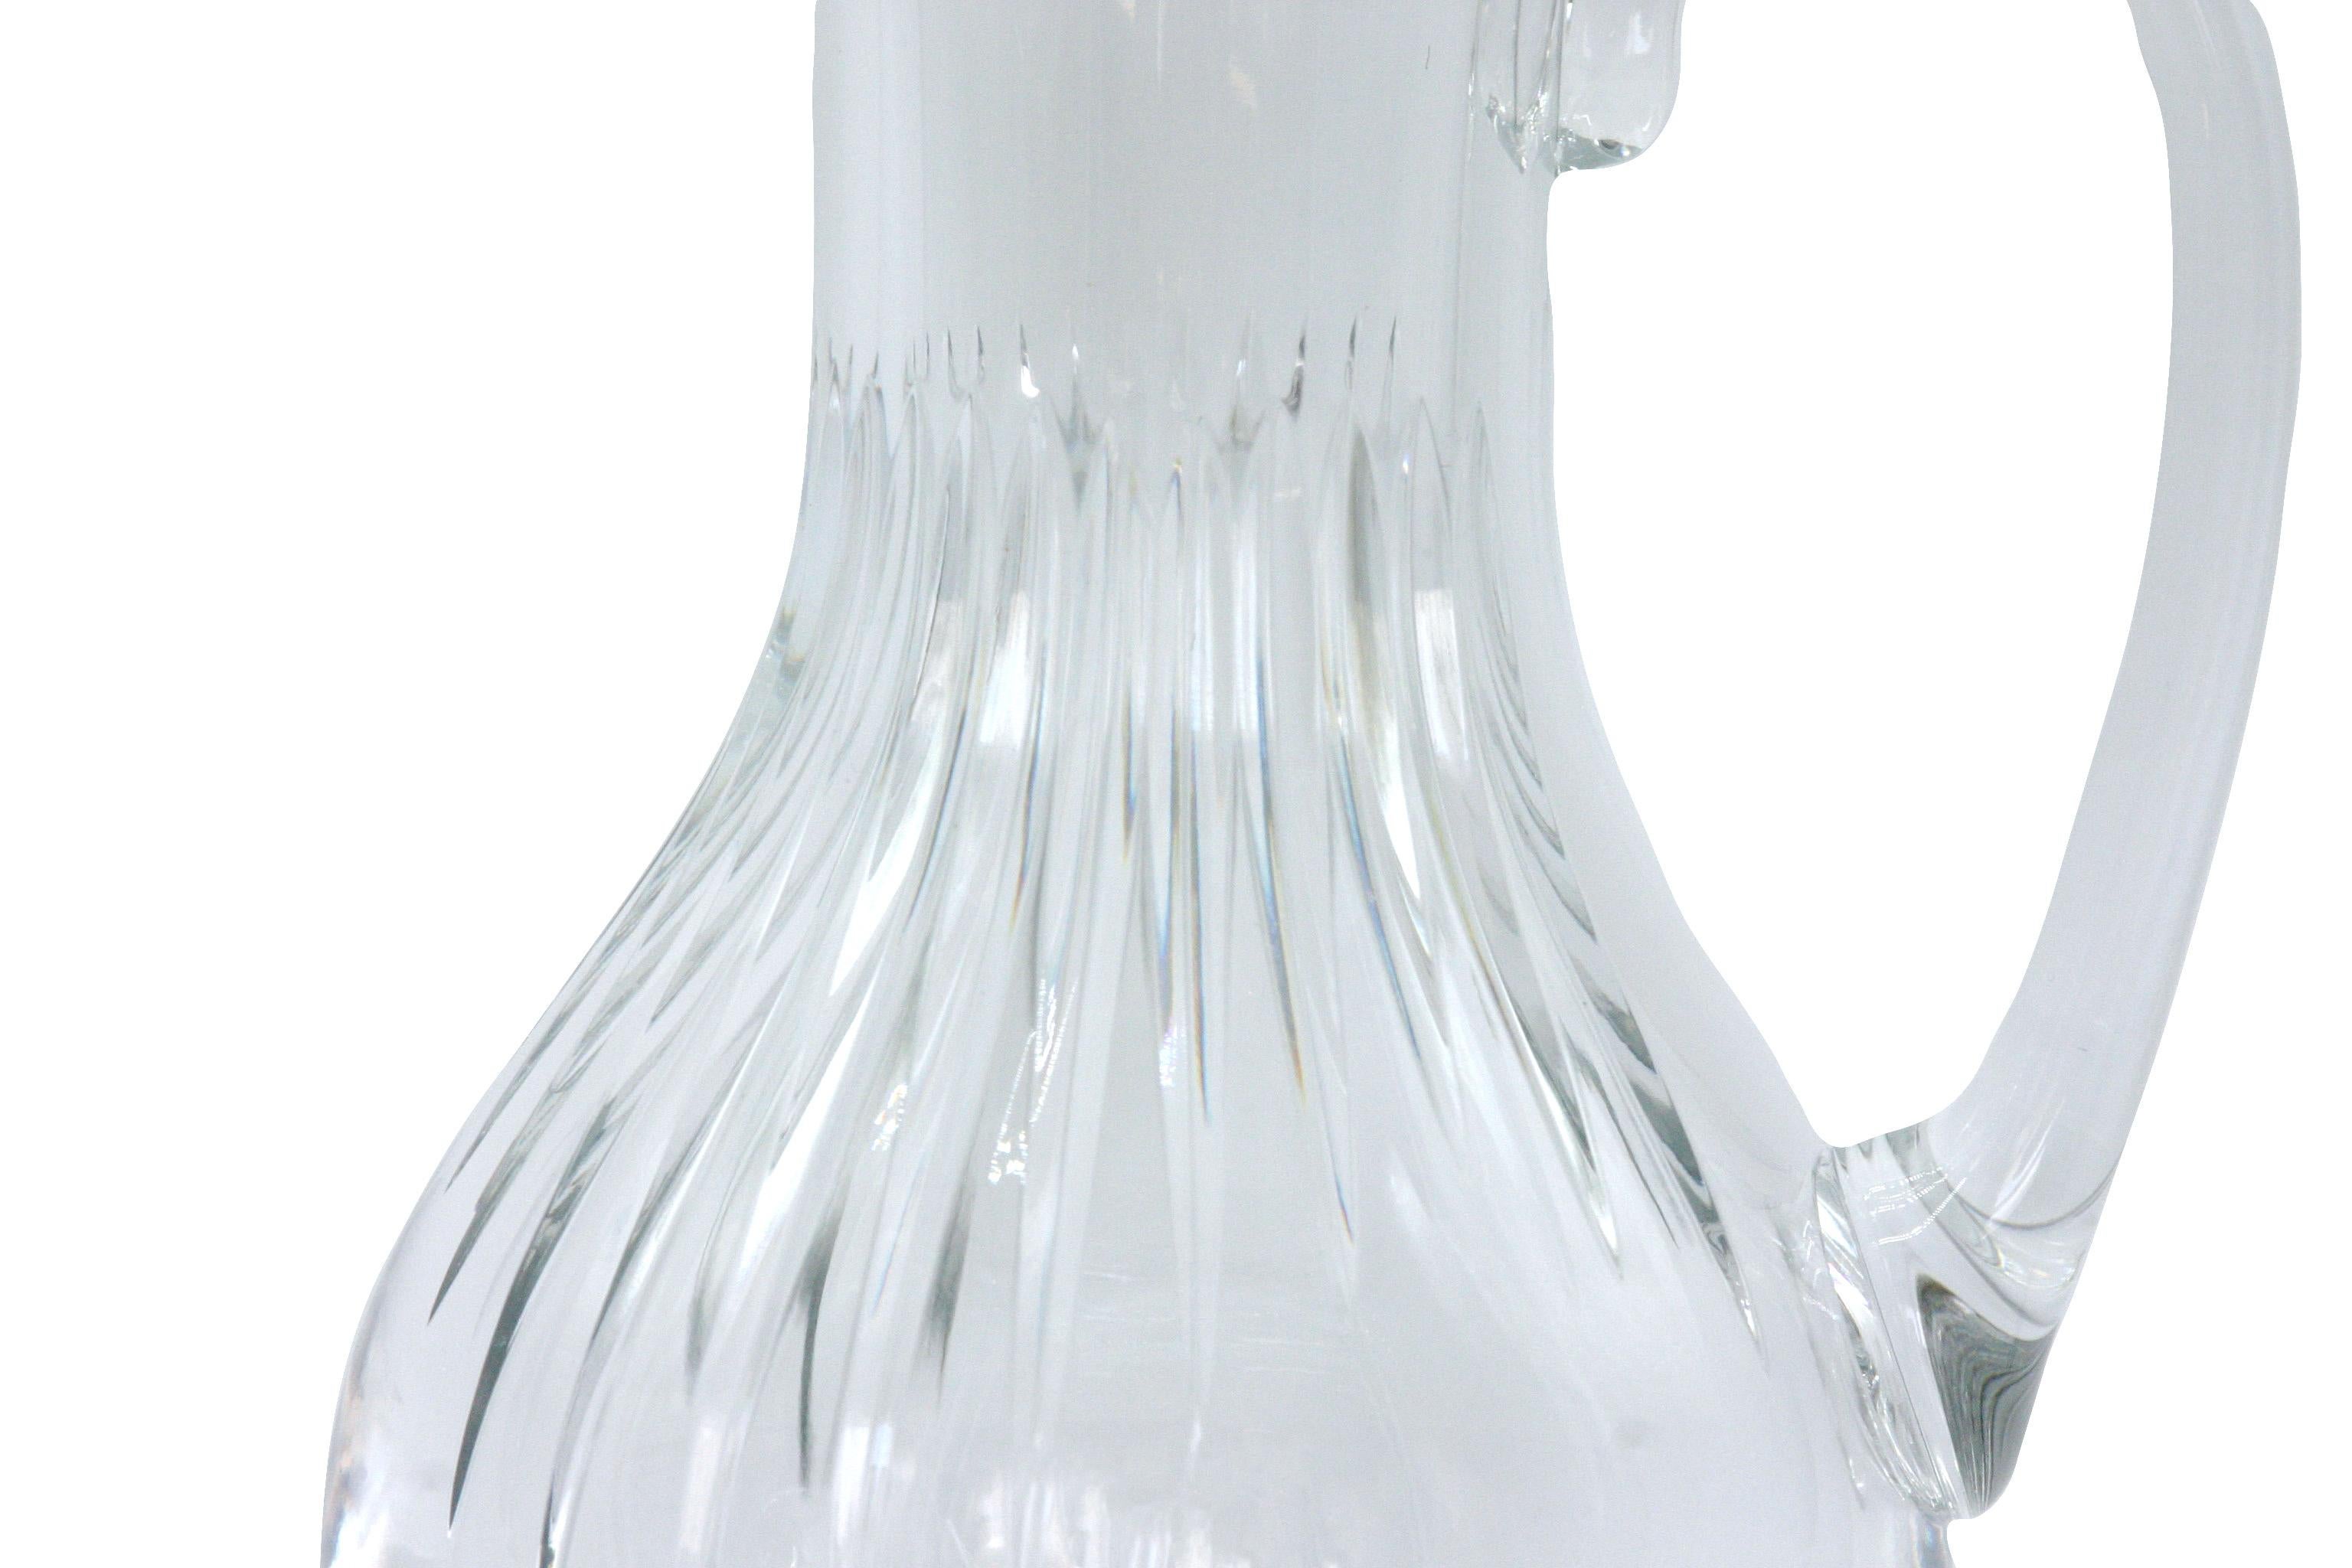 Baccarat Crystal Barware / Tableware Pitcher For Sale 2